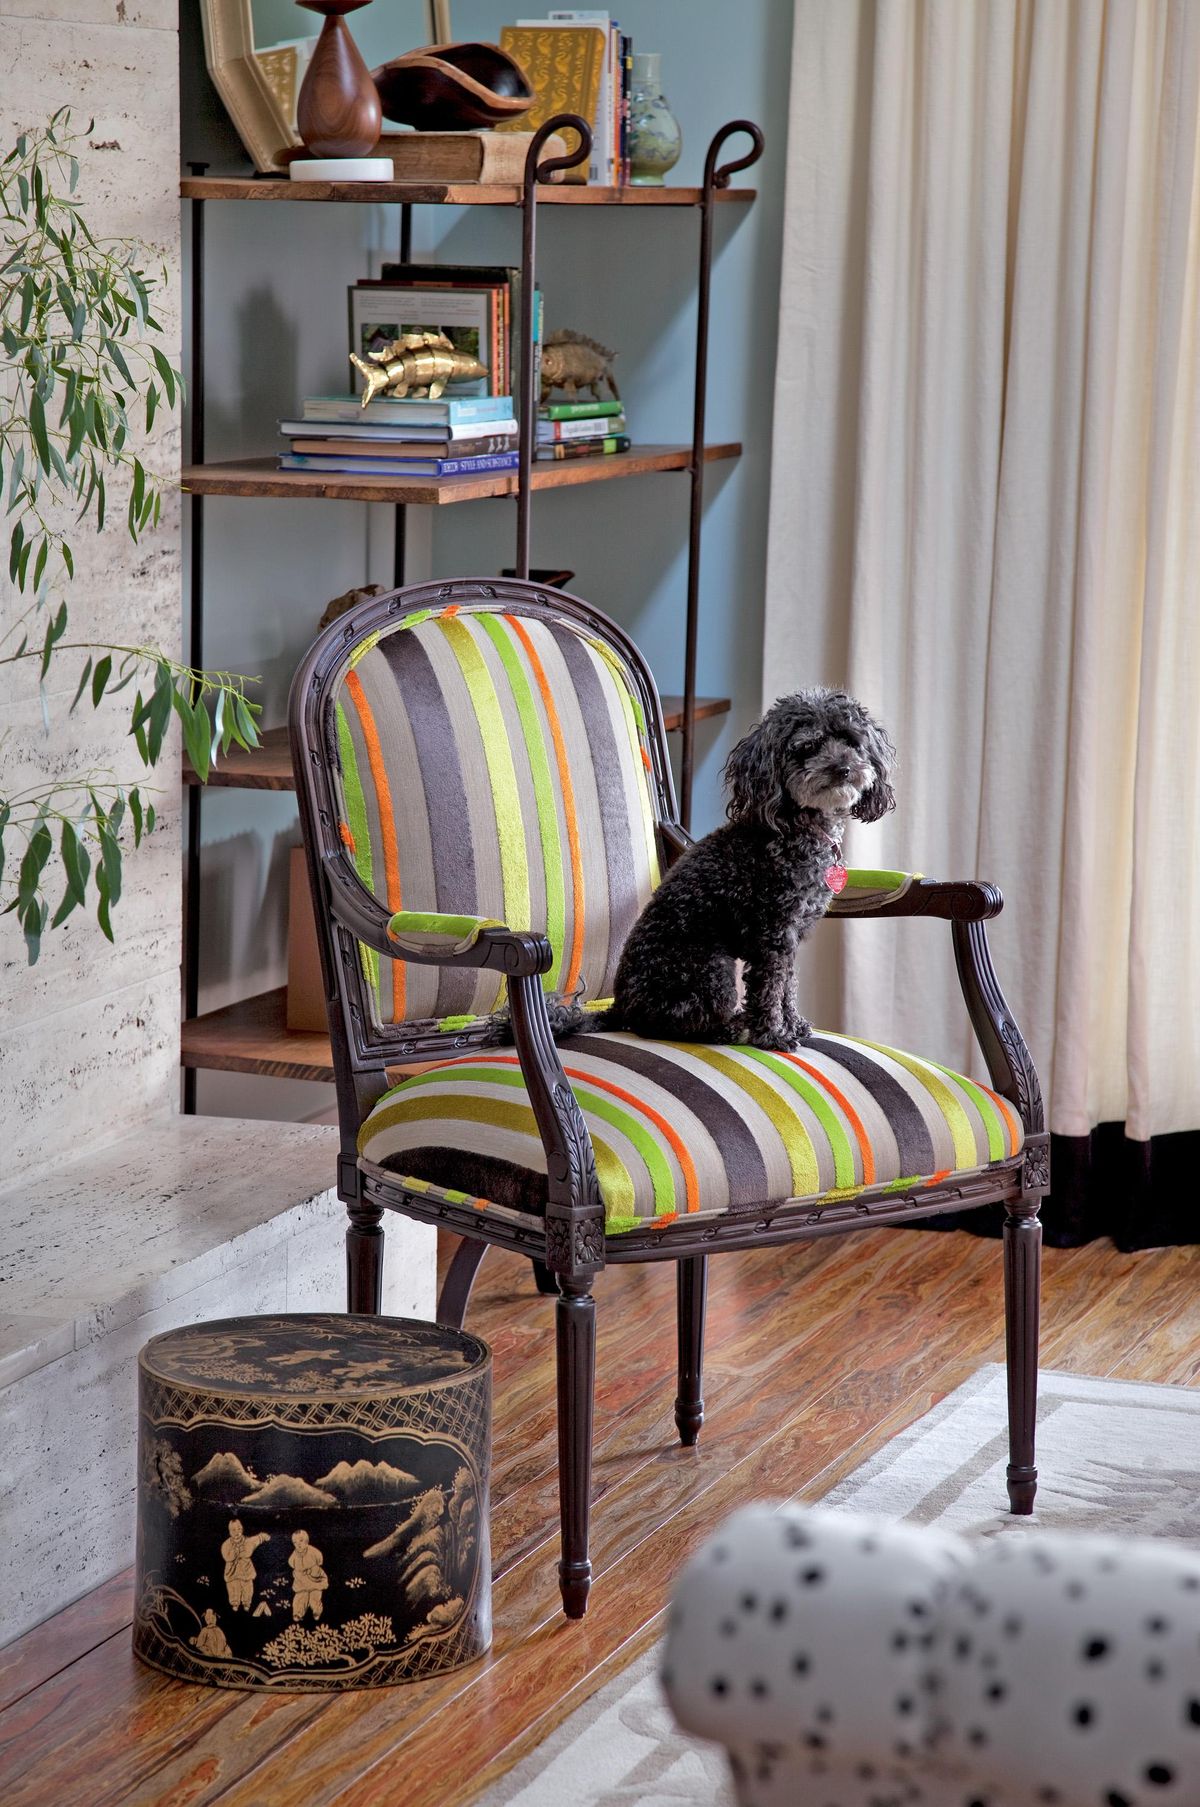 Reupholstering furniture can be done with a few simple tools, patience and time, according to Amanda Brown, author of “Spruce: A Step-by-step Guide to Upholstery and Design” (Storey, 2013), which takes readers through six projects including this Louis XVI chair reupholstered in a neon velvet stripe by Designers Guild. (Ryann Ford / Ryann Ford/Storey Publishing via Associated Press)